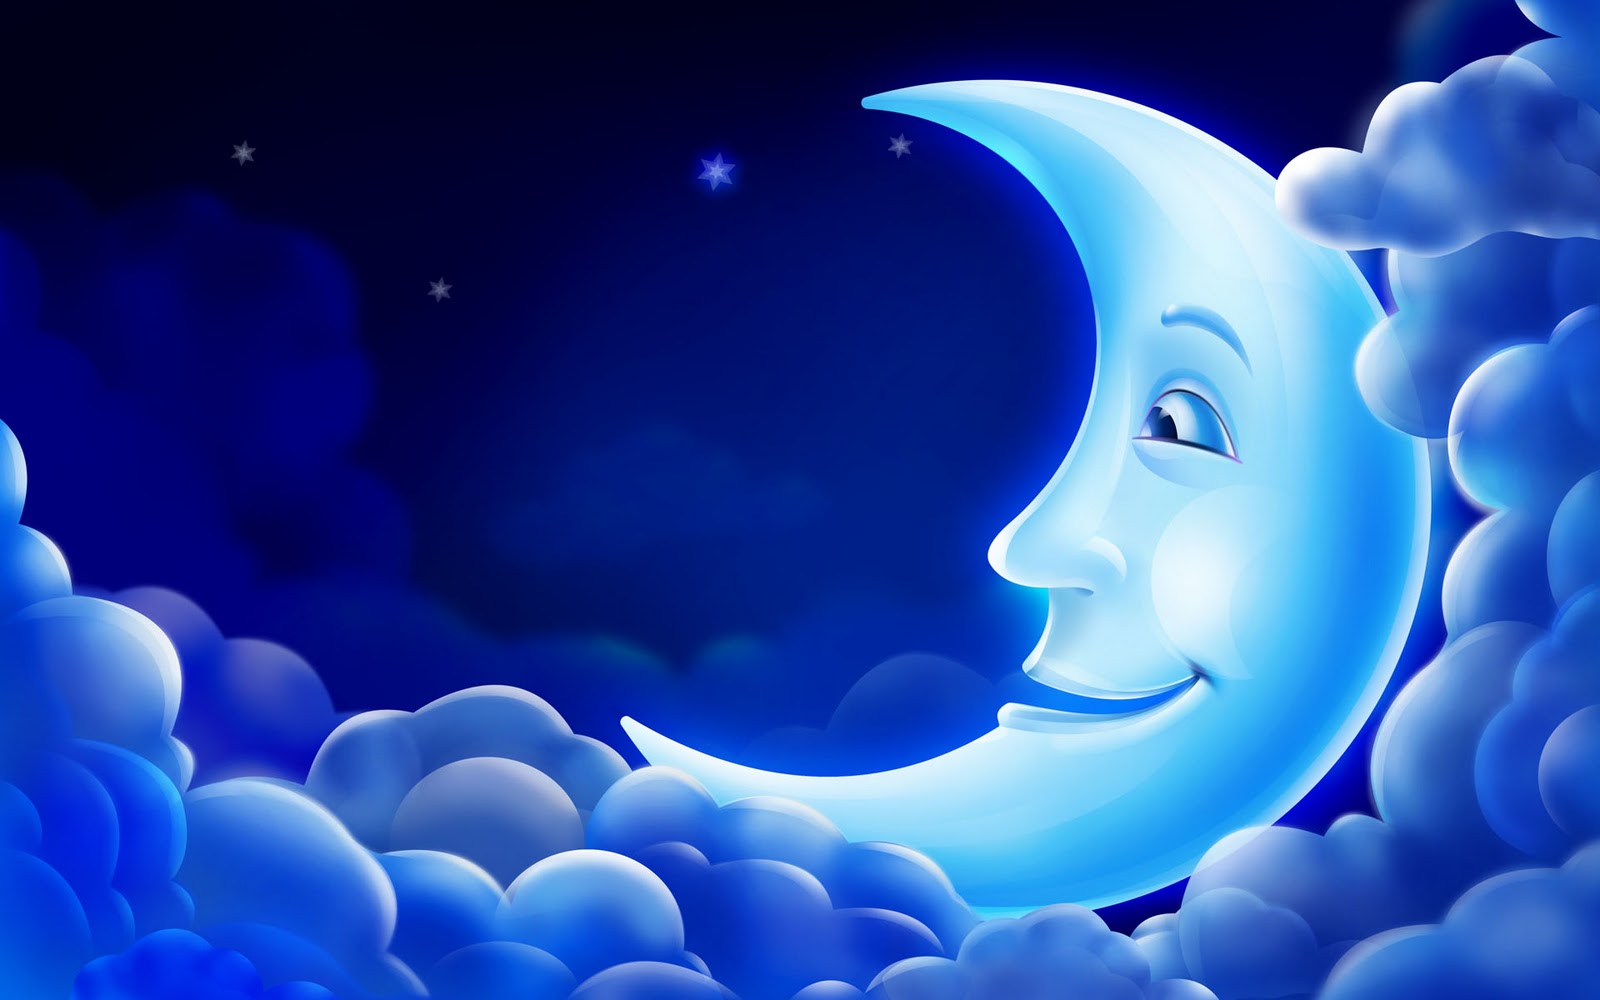 Cg 3d Animation Pc Background Blue Moon Smile Sky Star Wallpaper